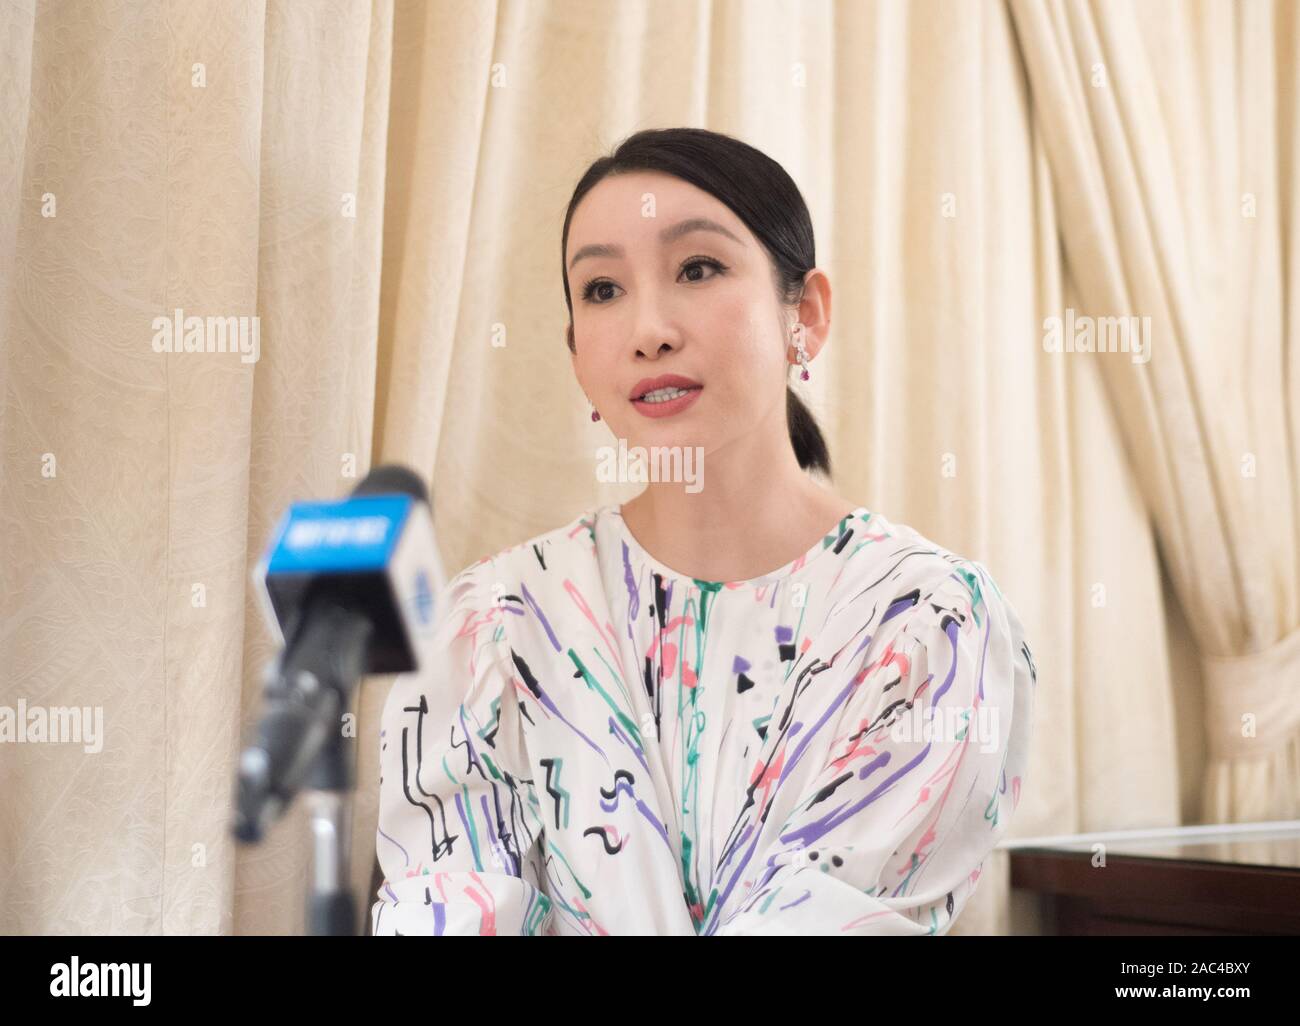 Cairo, Egypt. 29th Nov, 2019. Chinese actress Qin Hailu speaks during an interview in Cairo, Egypt, on Nov. 29, 2019. At the just-concluded Cairo International Film Festival (CIFF), Chinese films have won love and praise from the jury and audiences, said Chinese actress Qin Hailu, a member of the international jury. Credit: Wu Huiwo/Xinhua/Alamy Live News Stock Photo